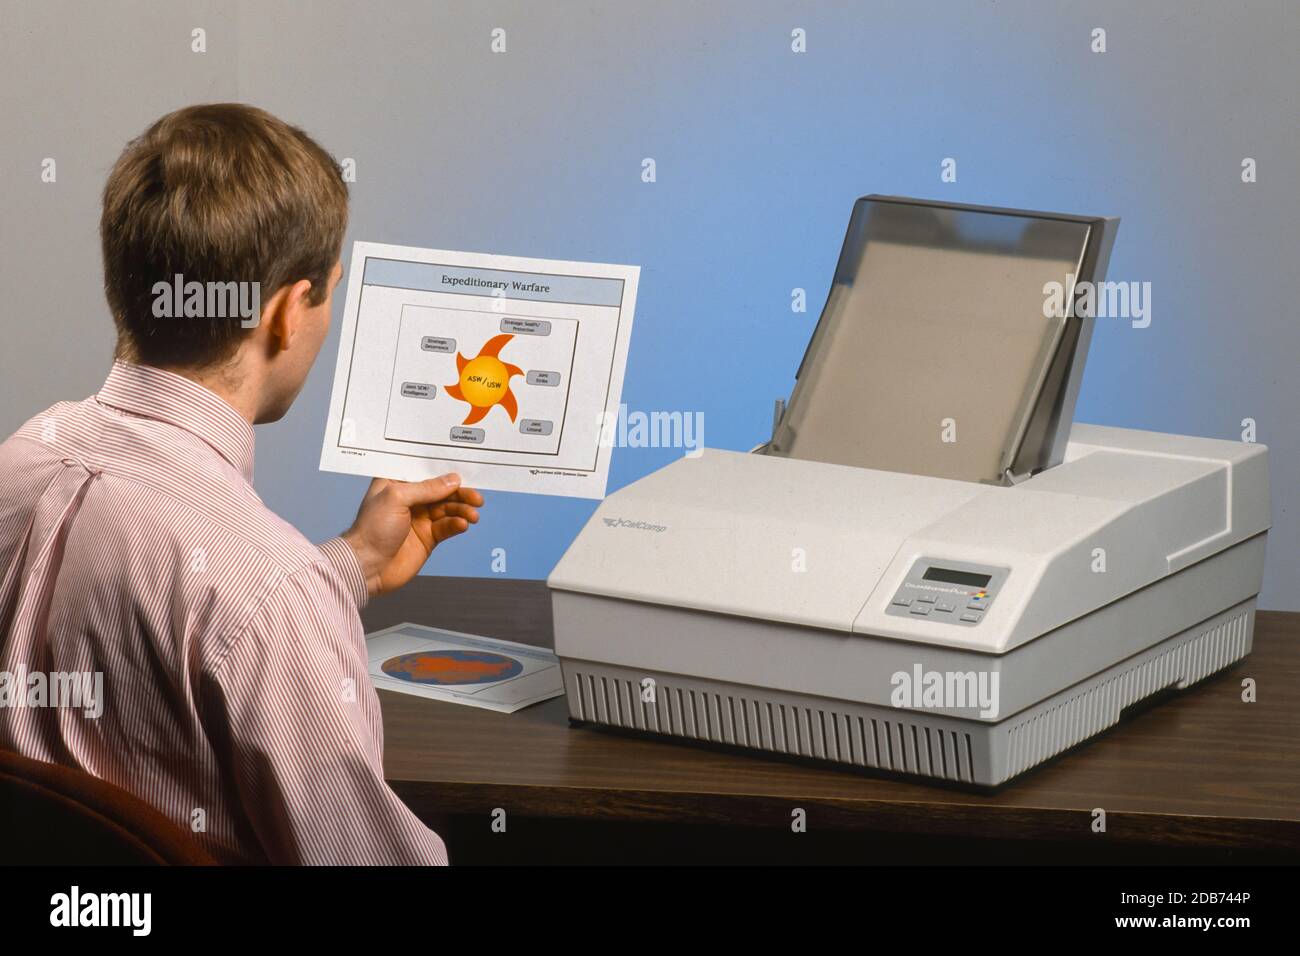 MCLEAN, VIRGINIA, USA, APRIL 7, 1993 - Lockheed employee with Calcomp ColorMaster Plus printer on desk. Stock Photo